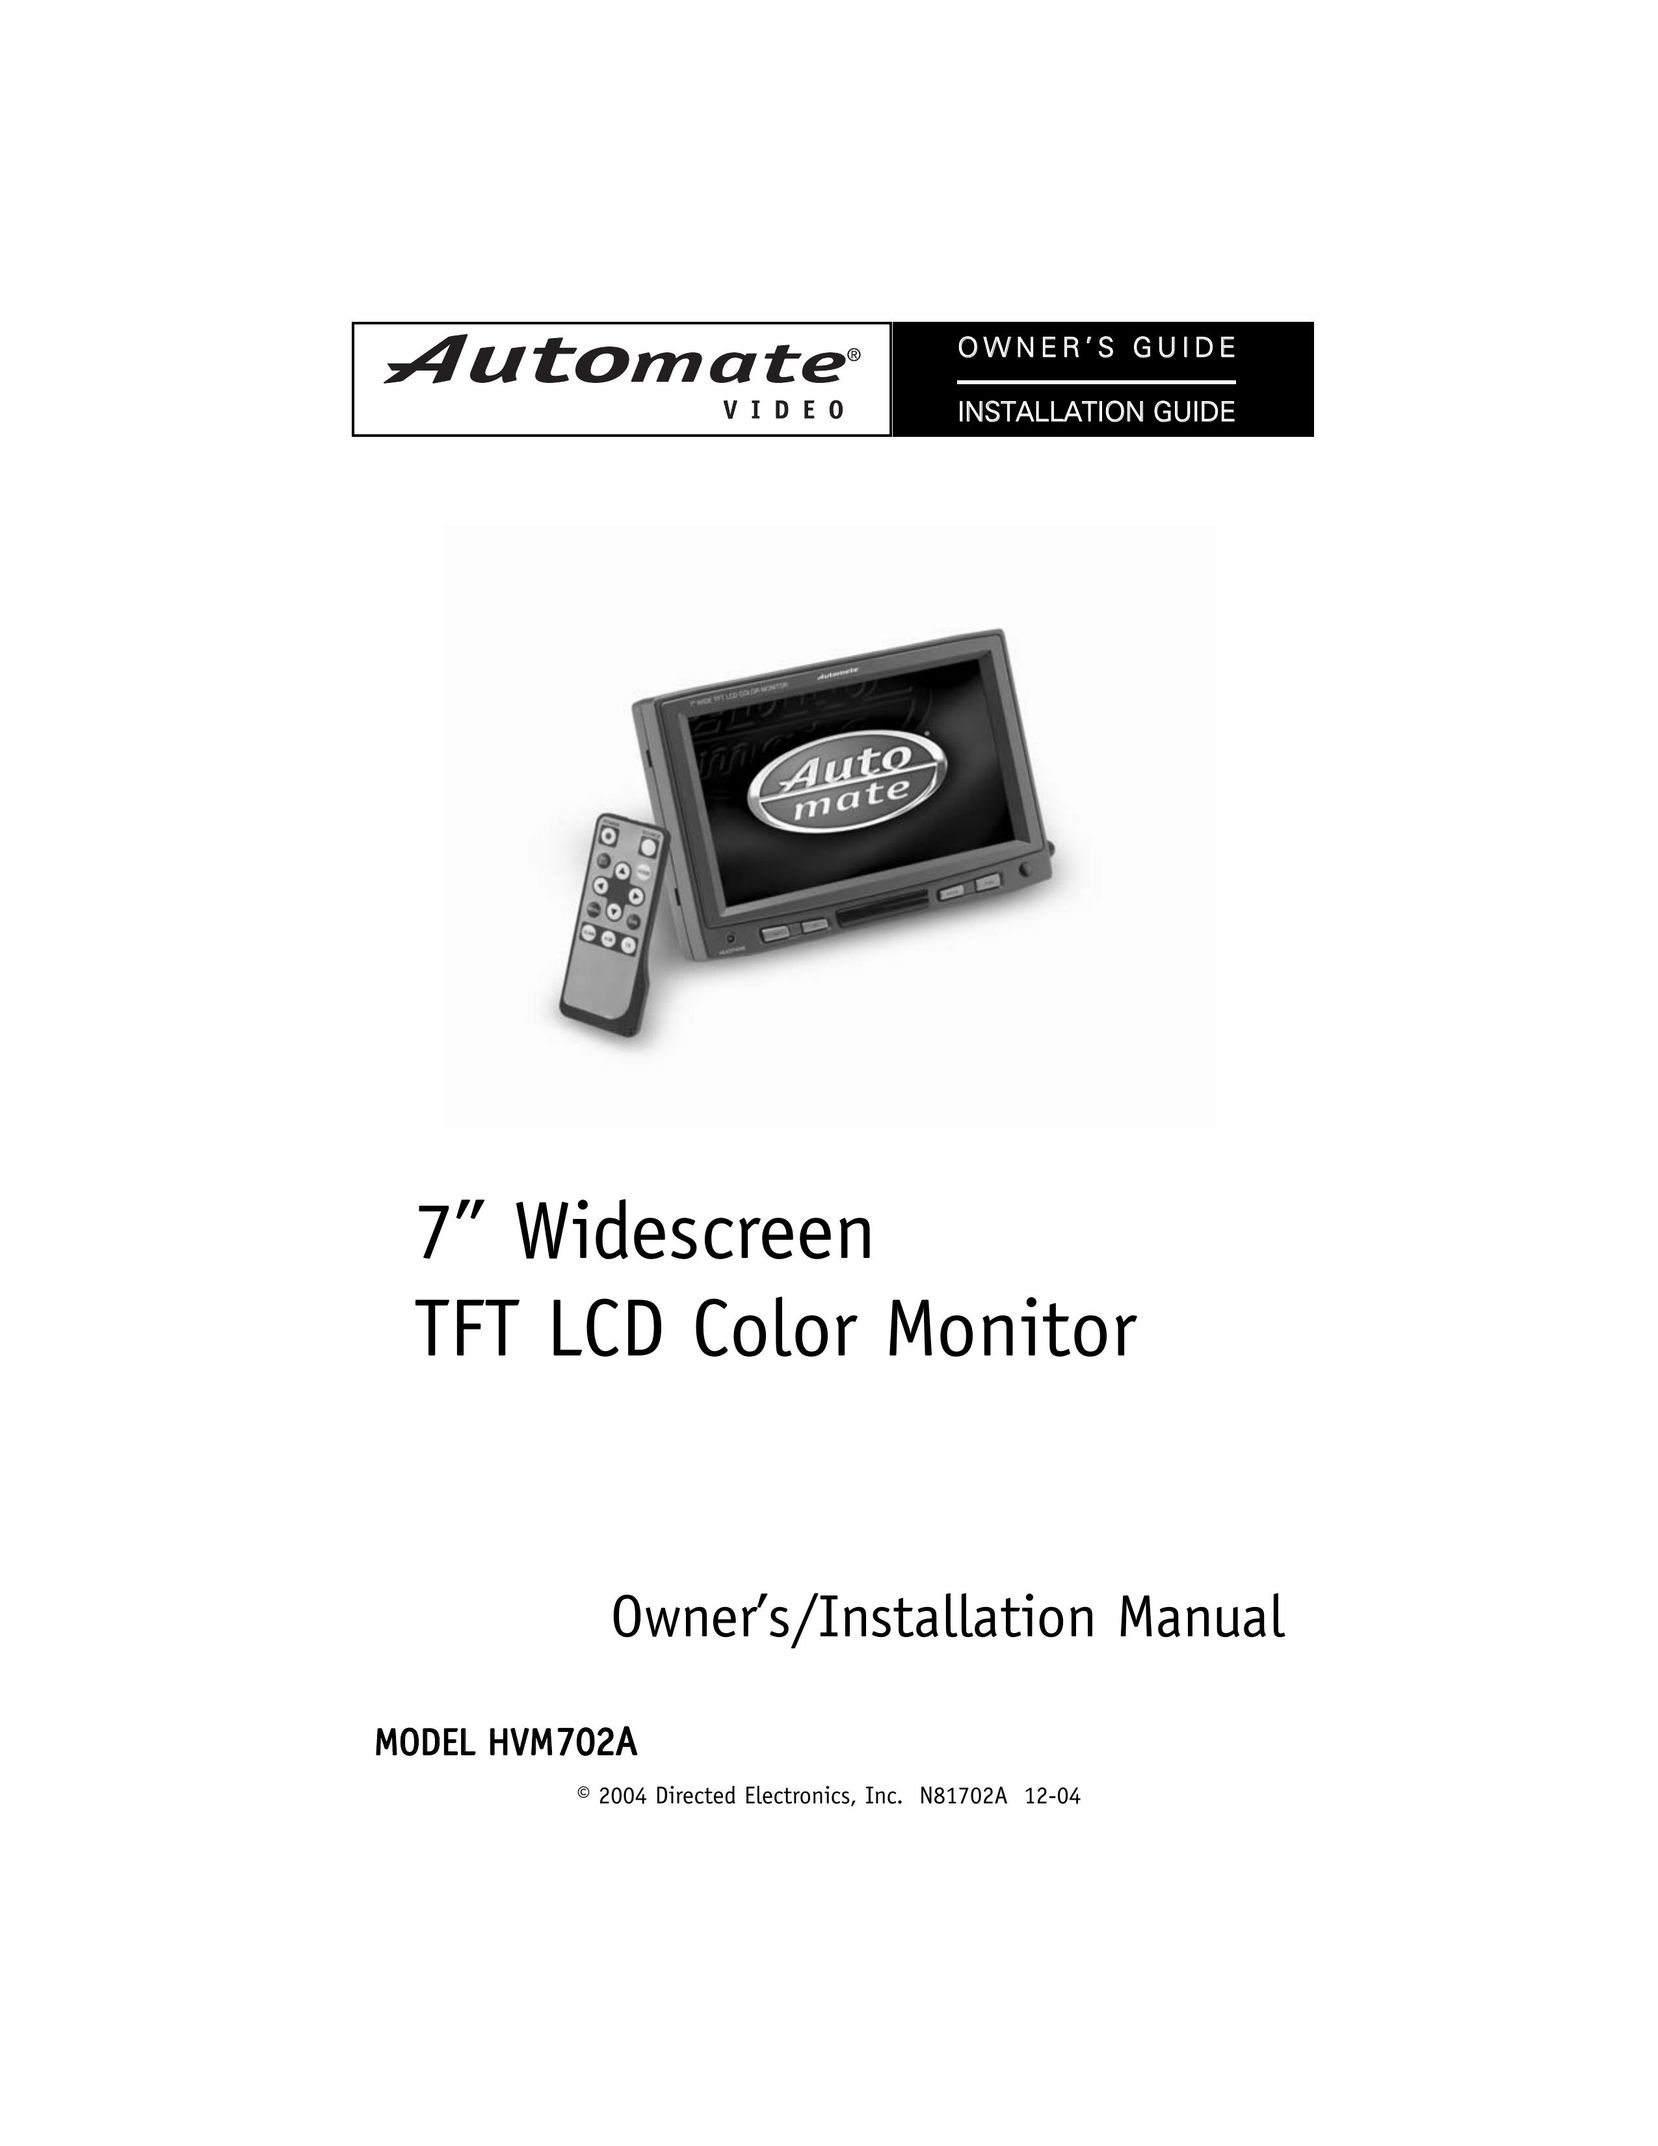 Directed Electronics HVM702A Car Video System User Manual